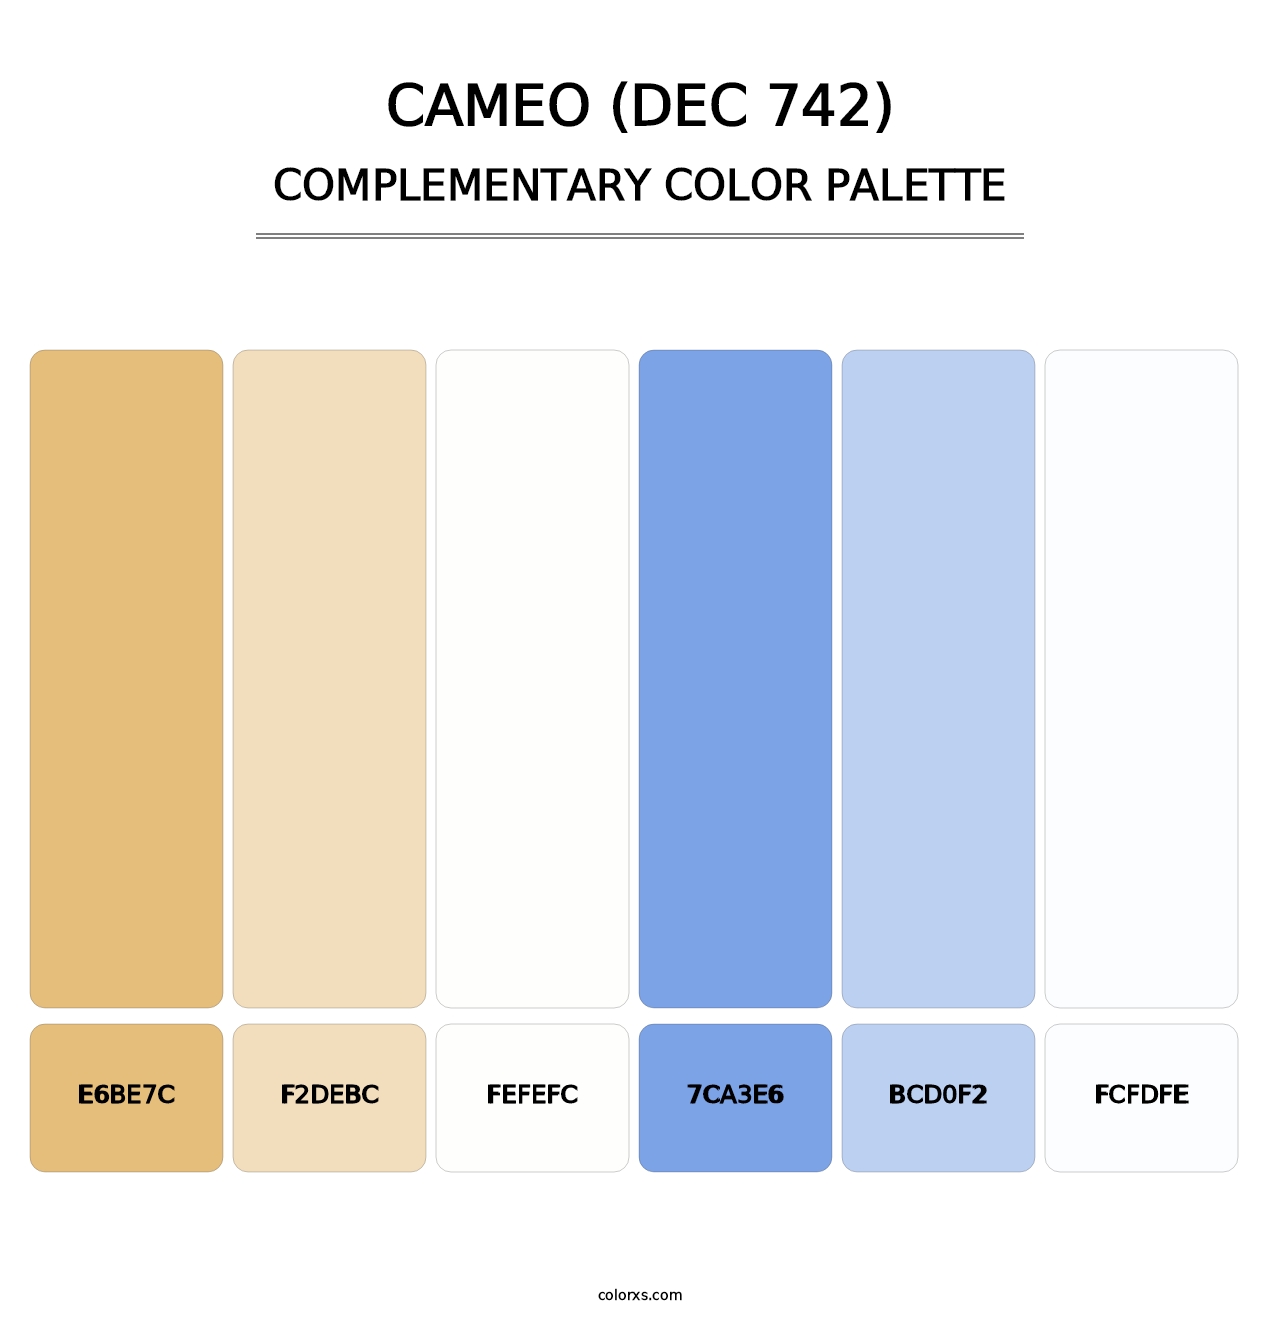 Cameo (DEC 742) - Complementary Color Palette